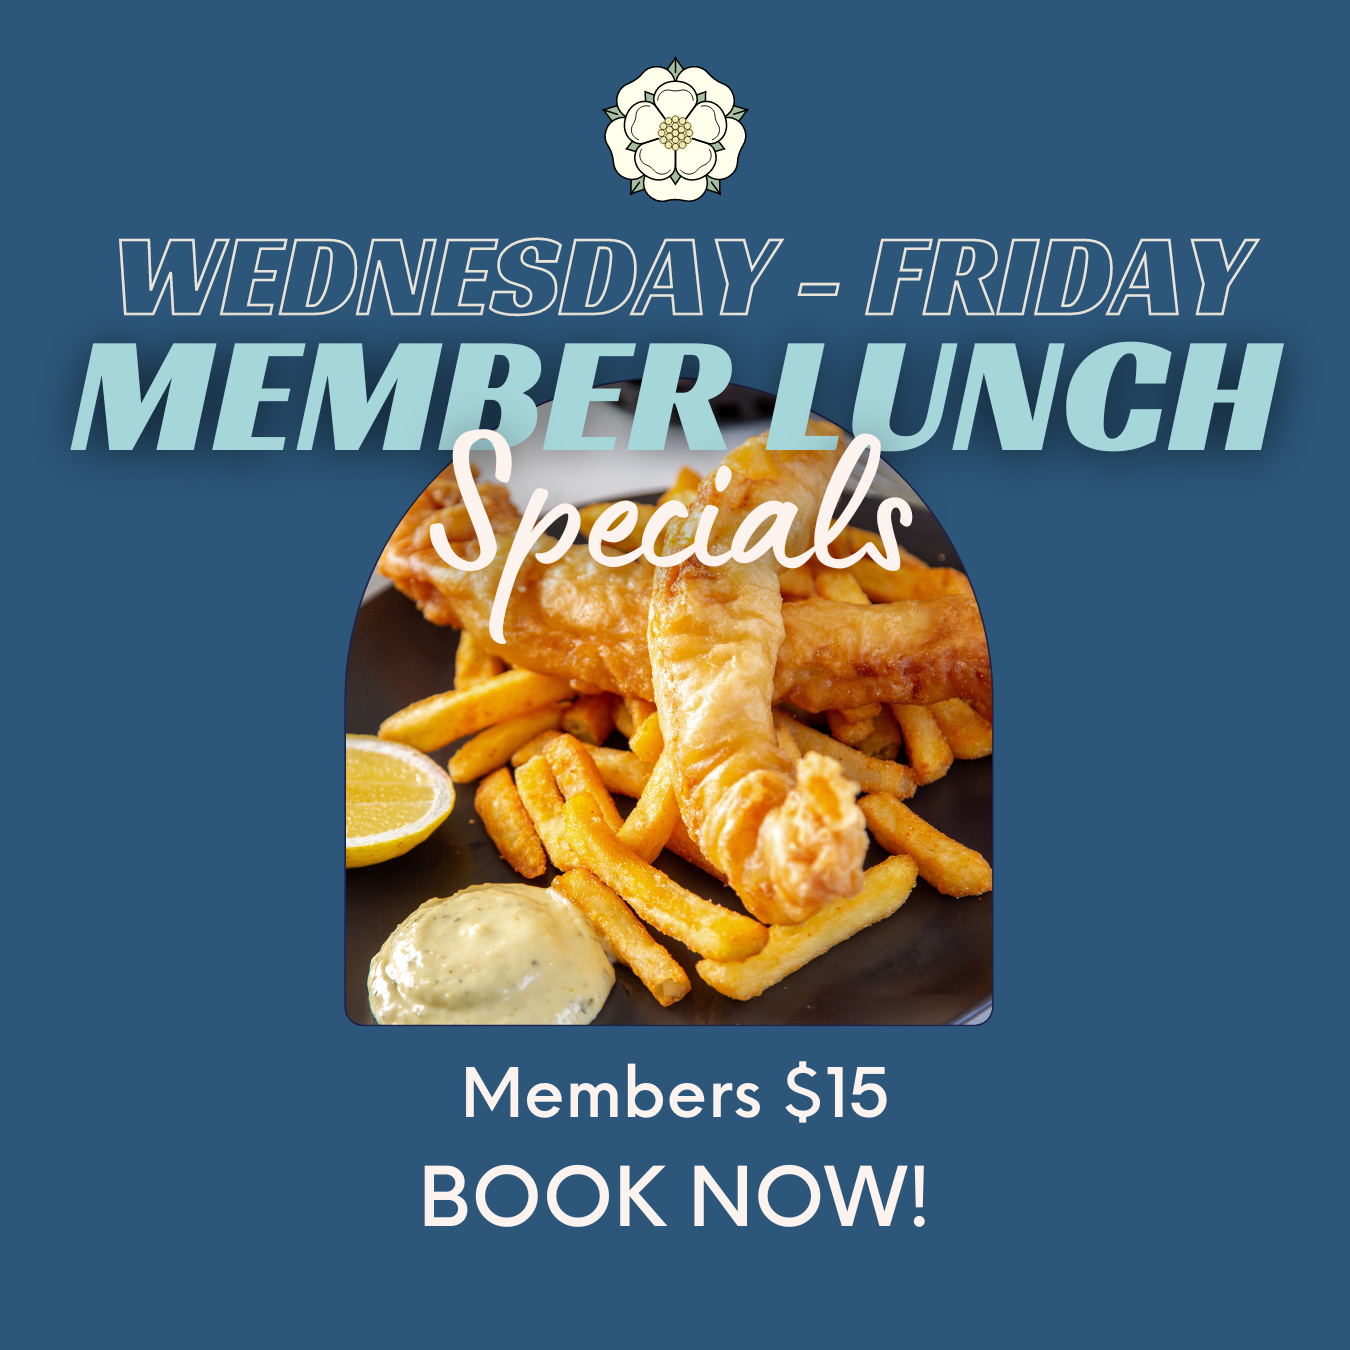 Wed - Fri Member Lunch Specials 2.png